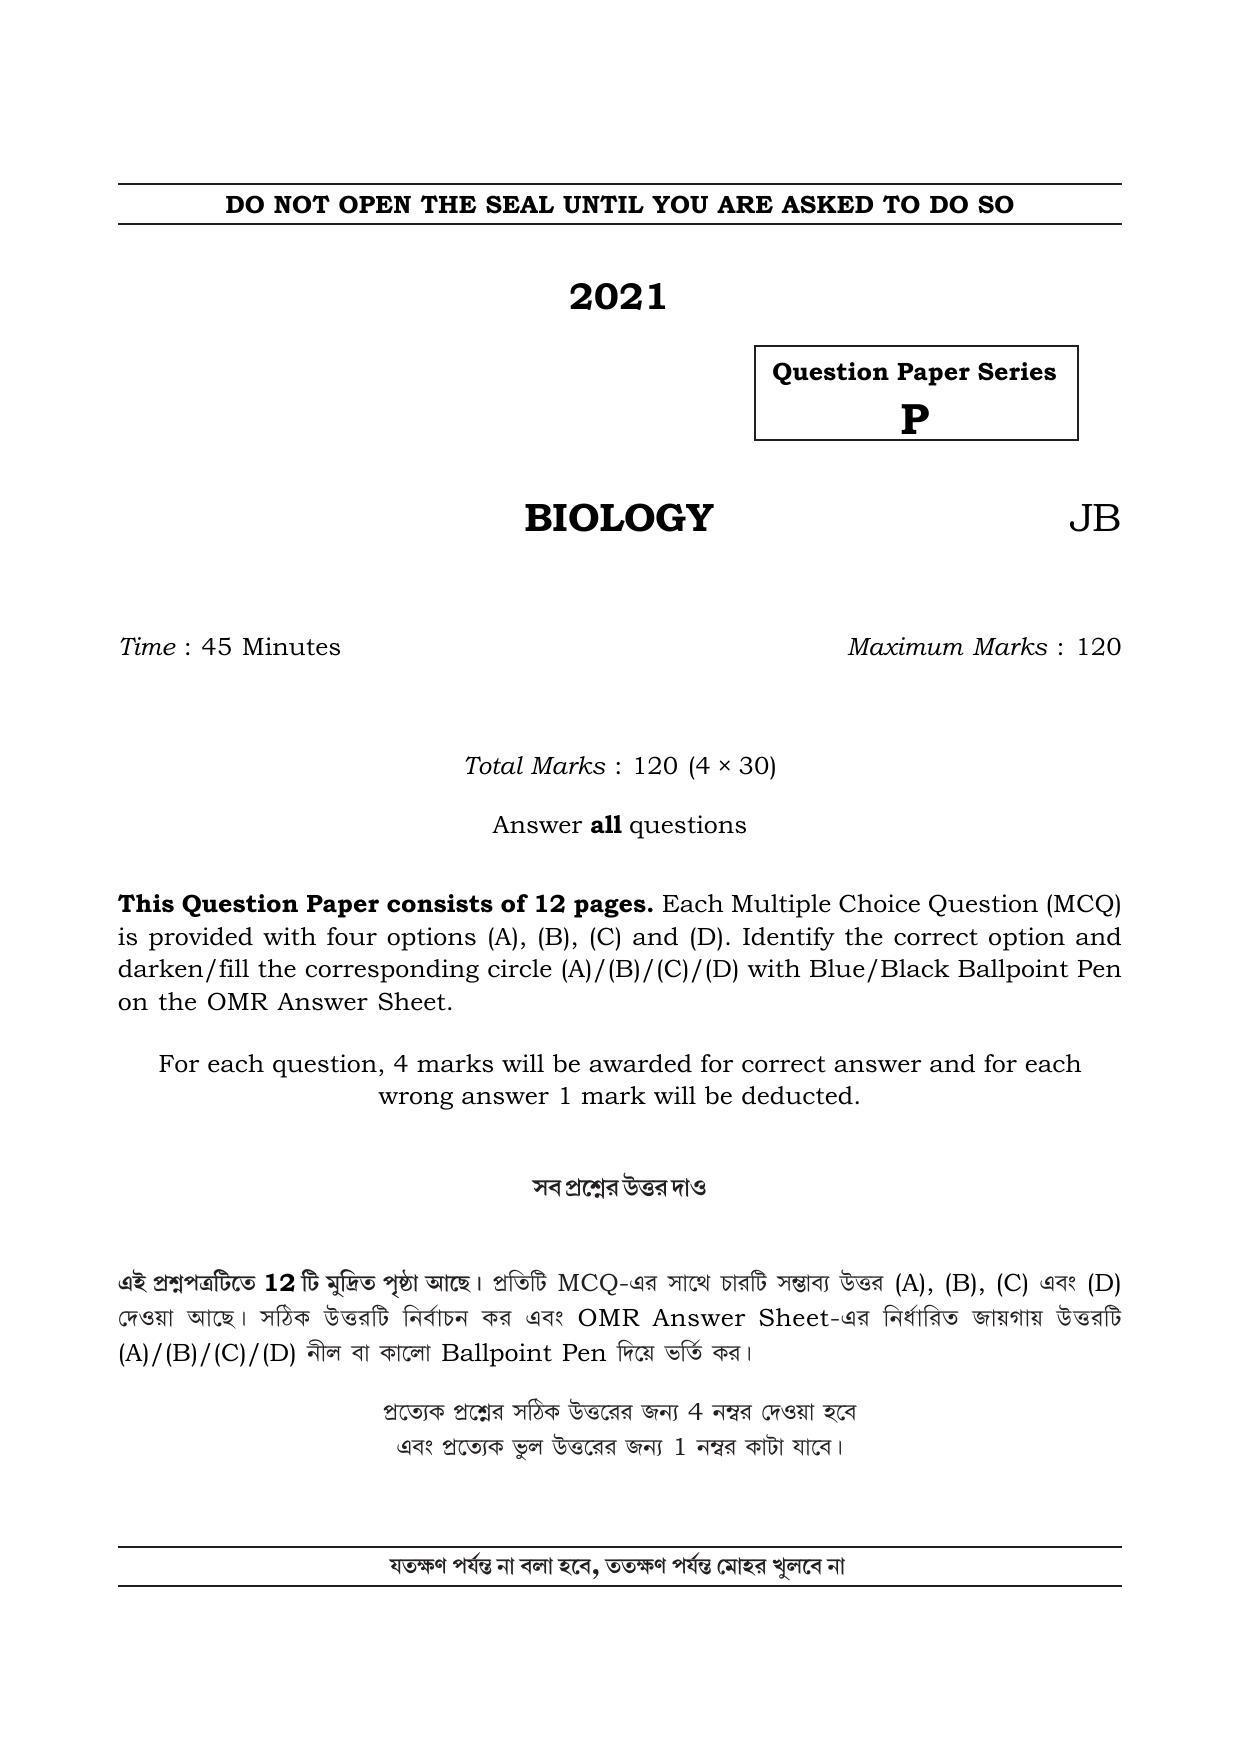 TBJEE Question Paper 2021 - Biology - Page 1